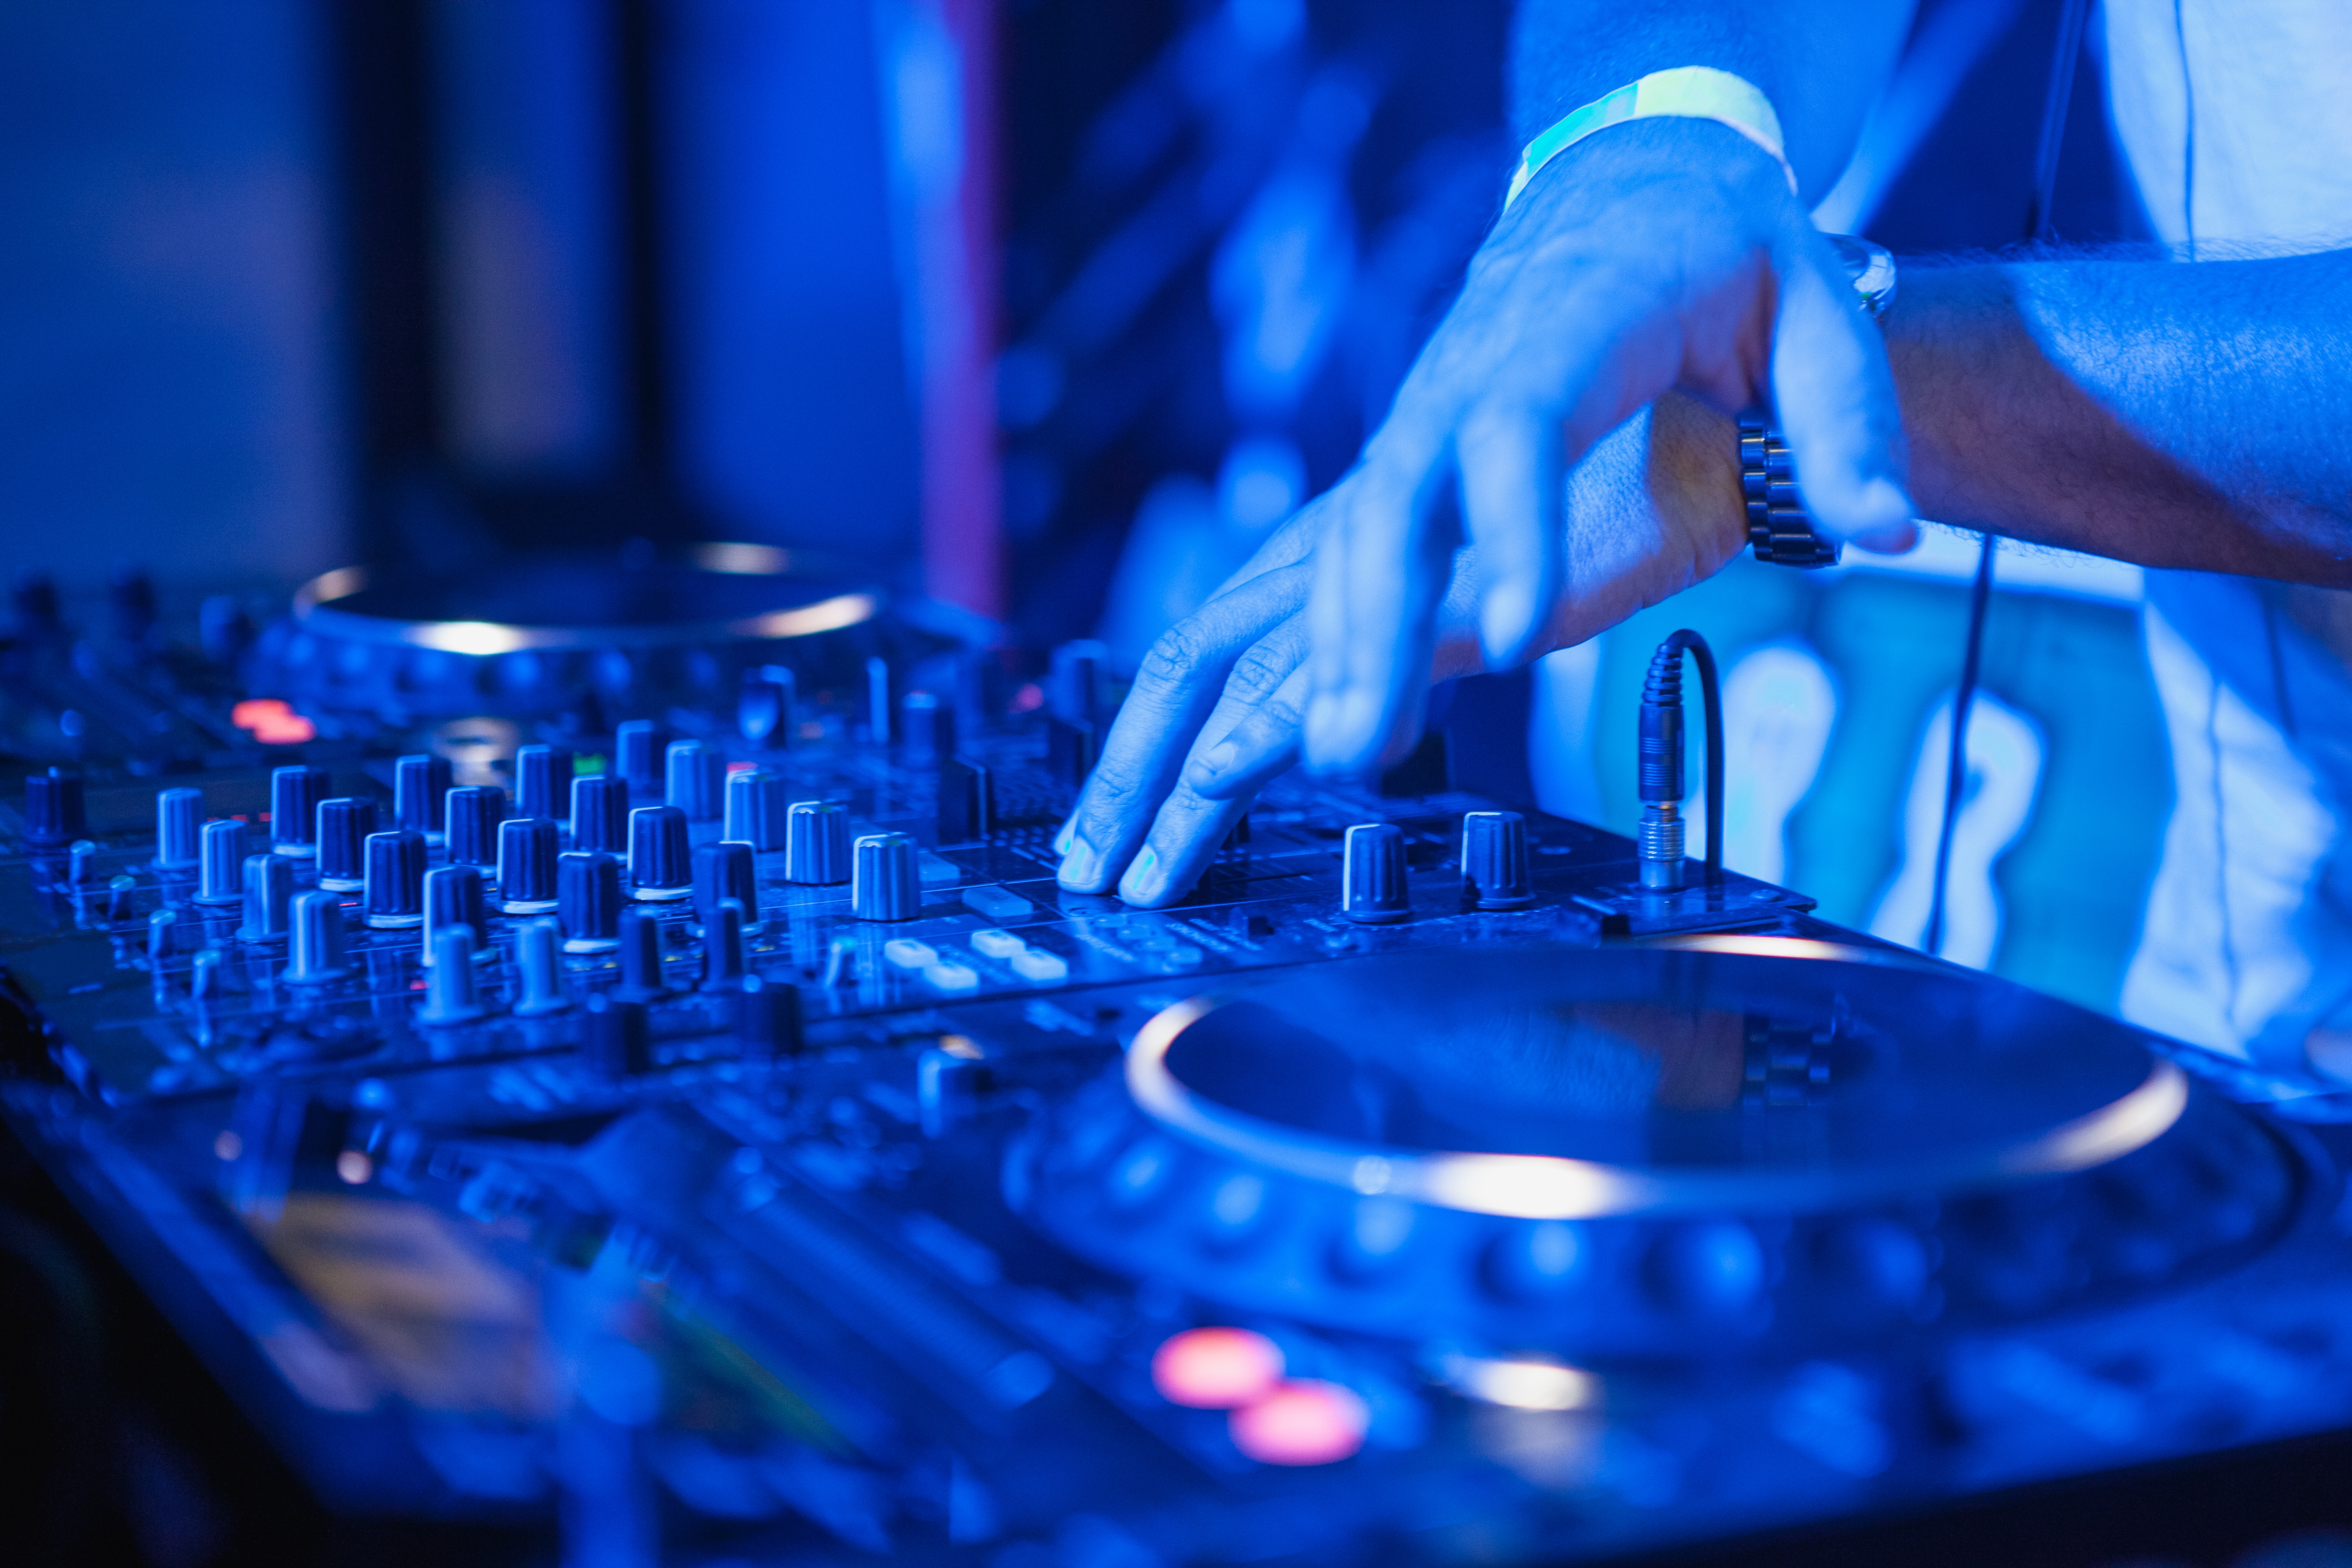 DJ playing music at mixer on colorful blurred background. The hands close up